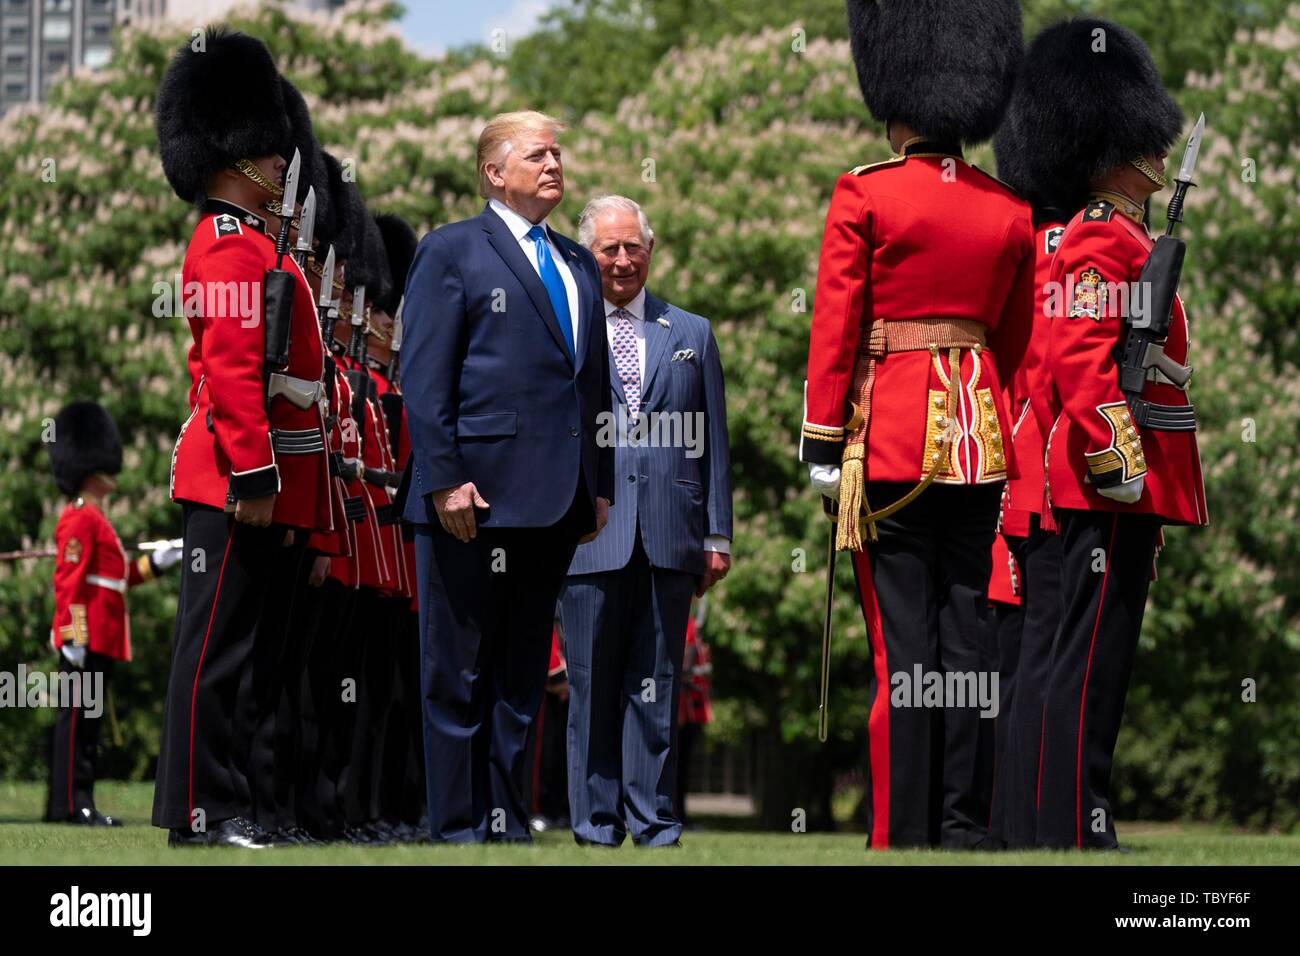 London, UK. 03rd June, 2019. U.S President Donald Trump escorted by the HRH Prince Charles inspect the Queens Guard during an official welcome ceremony at Buckingham Palace June 3, 2019 in London, England. Credit: Planetpix/Alamy Live News Stock Photo